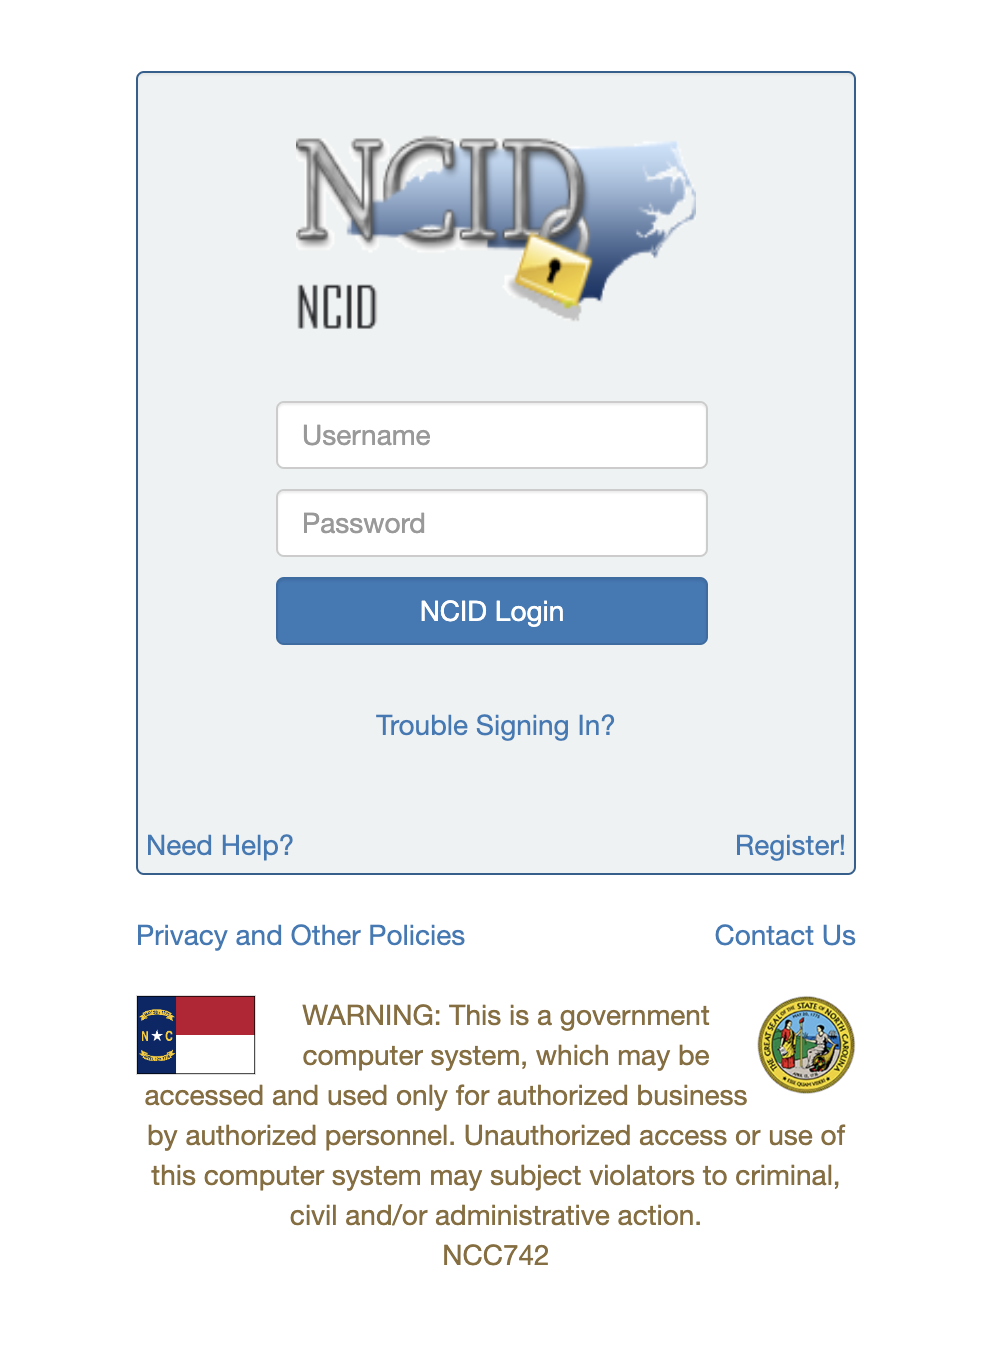 NCID login page with a username and password field and NCID login button